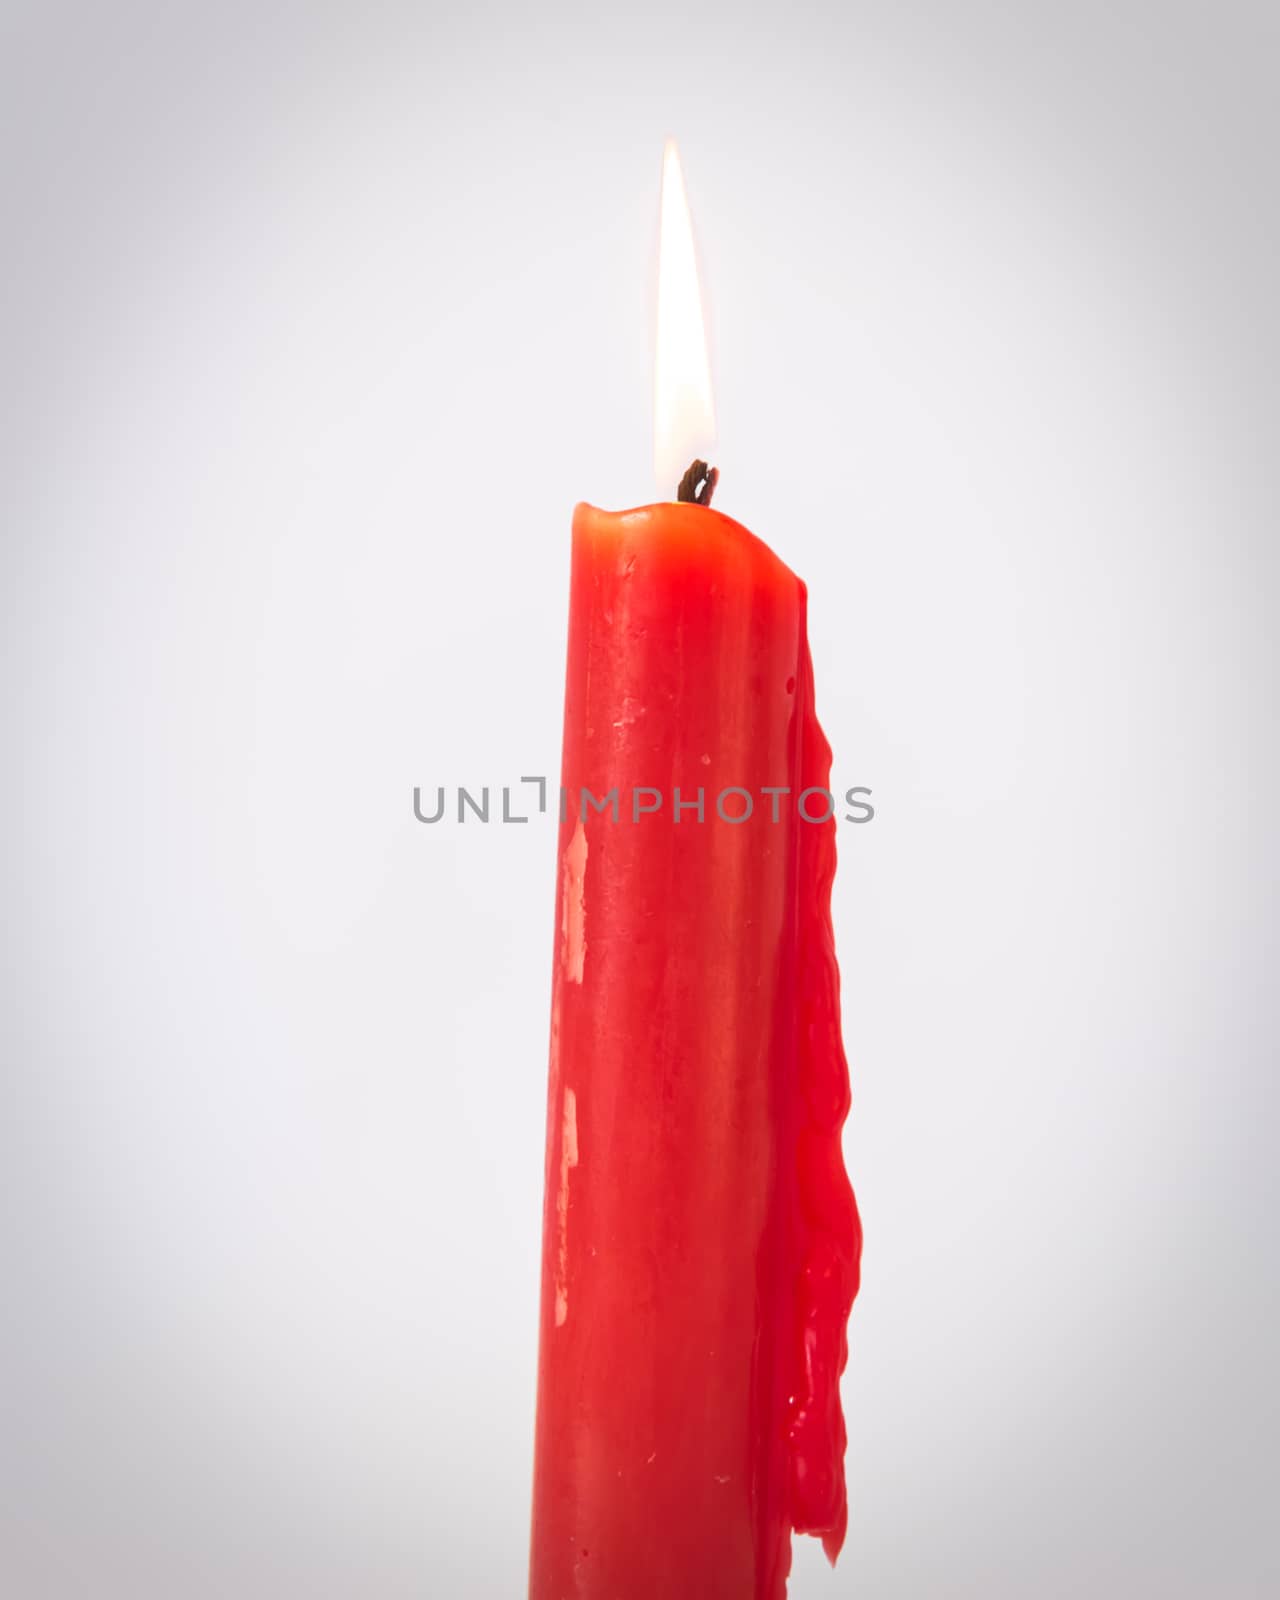 Vintage tone close-up single red burning candle isolated on white background. Popular Asian stick candle for daily and holiday uses.